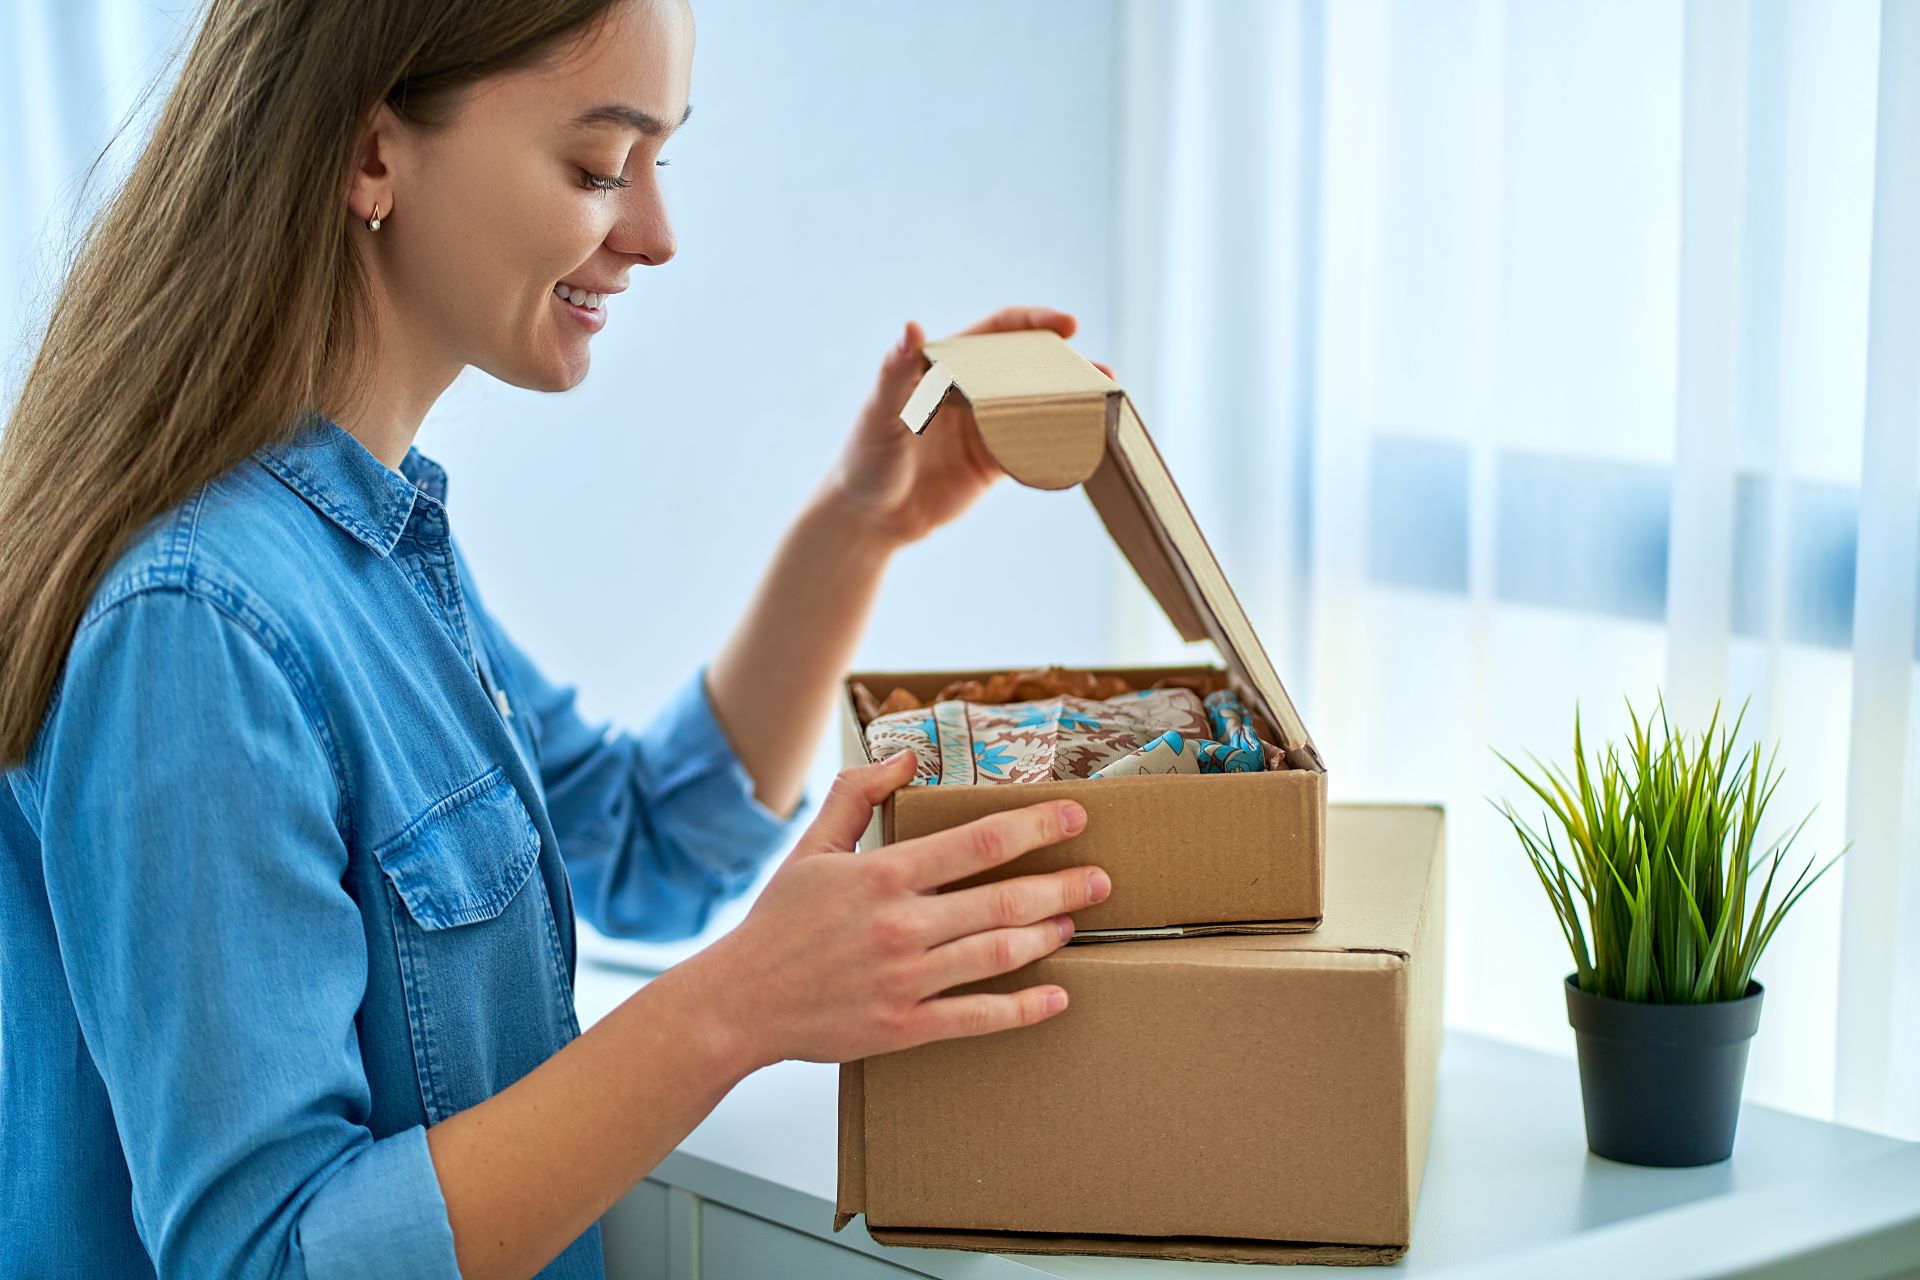 Woman in blue shirt opening a box